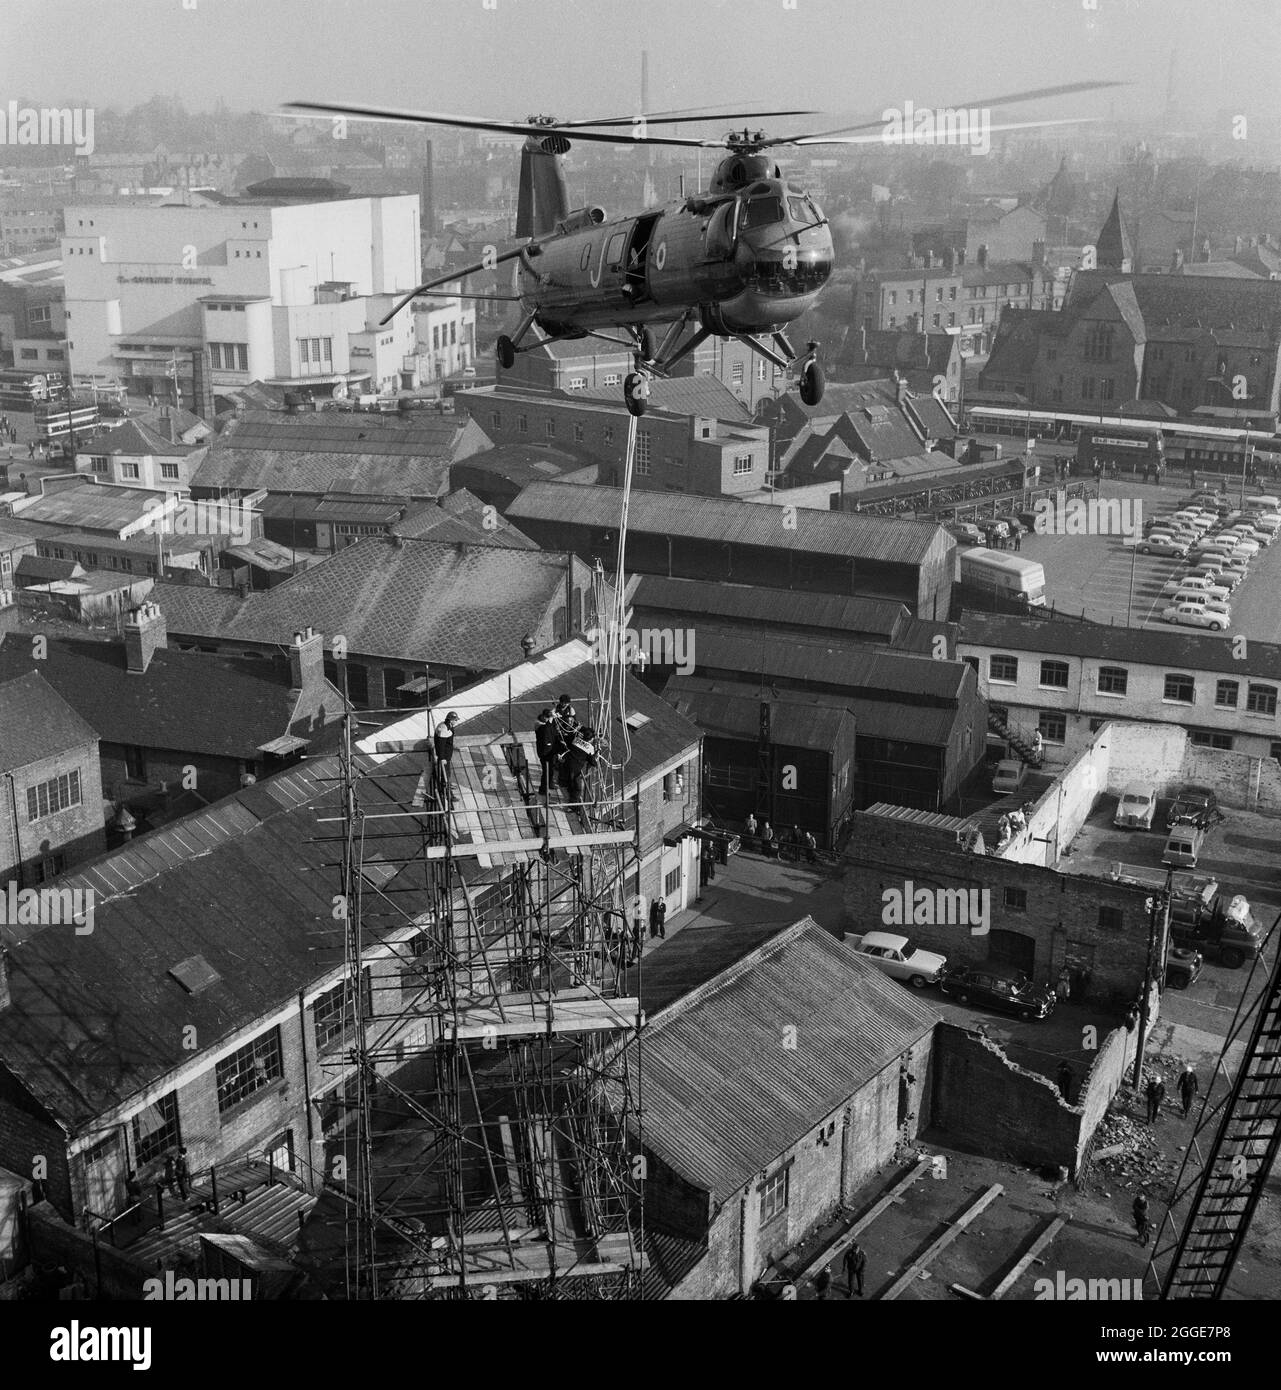 A view looking north from the roof of Coventry Cathedral, showing a RAF Belvedere helicopter attempting to hoist the 80ft bronze spire for the new cathedral from a scaffolding tower on site, with the city of Coventry in the background including the bus station and The Coventry Theatre. The photograph was taken during 'Operation Rich Man' a joint project involving Royal Air Force staff and Laing staff. This involved a RAF Belvedere helicopter hoisting in to place the 80ft bronze spire on to the new cathedral. The part of the operation to lower the 1/2 ton cross that sits on top of the spire had Stock Photo